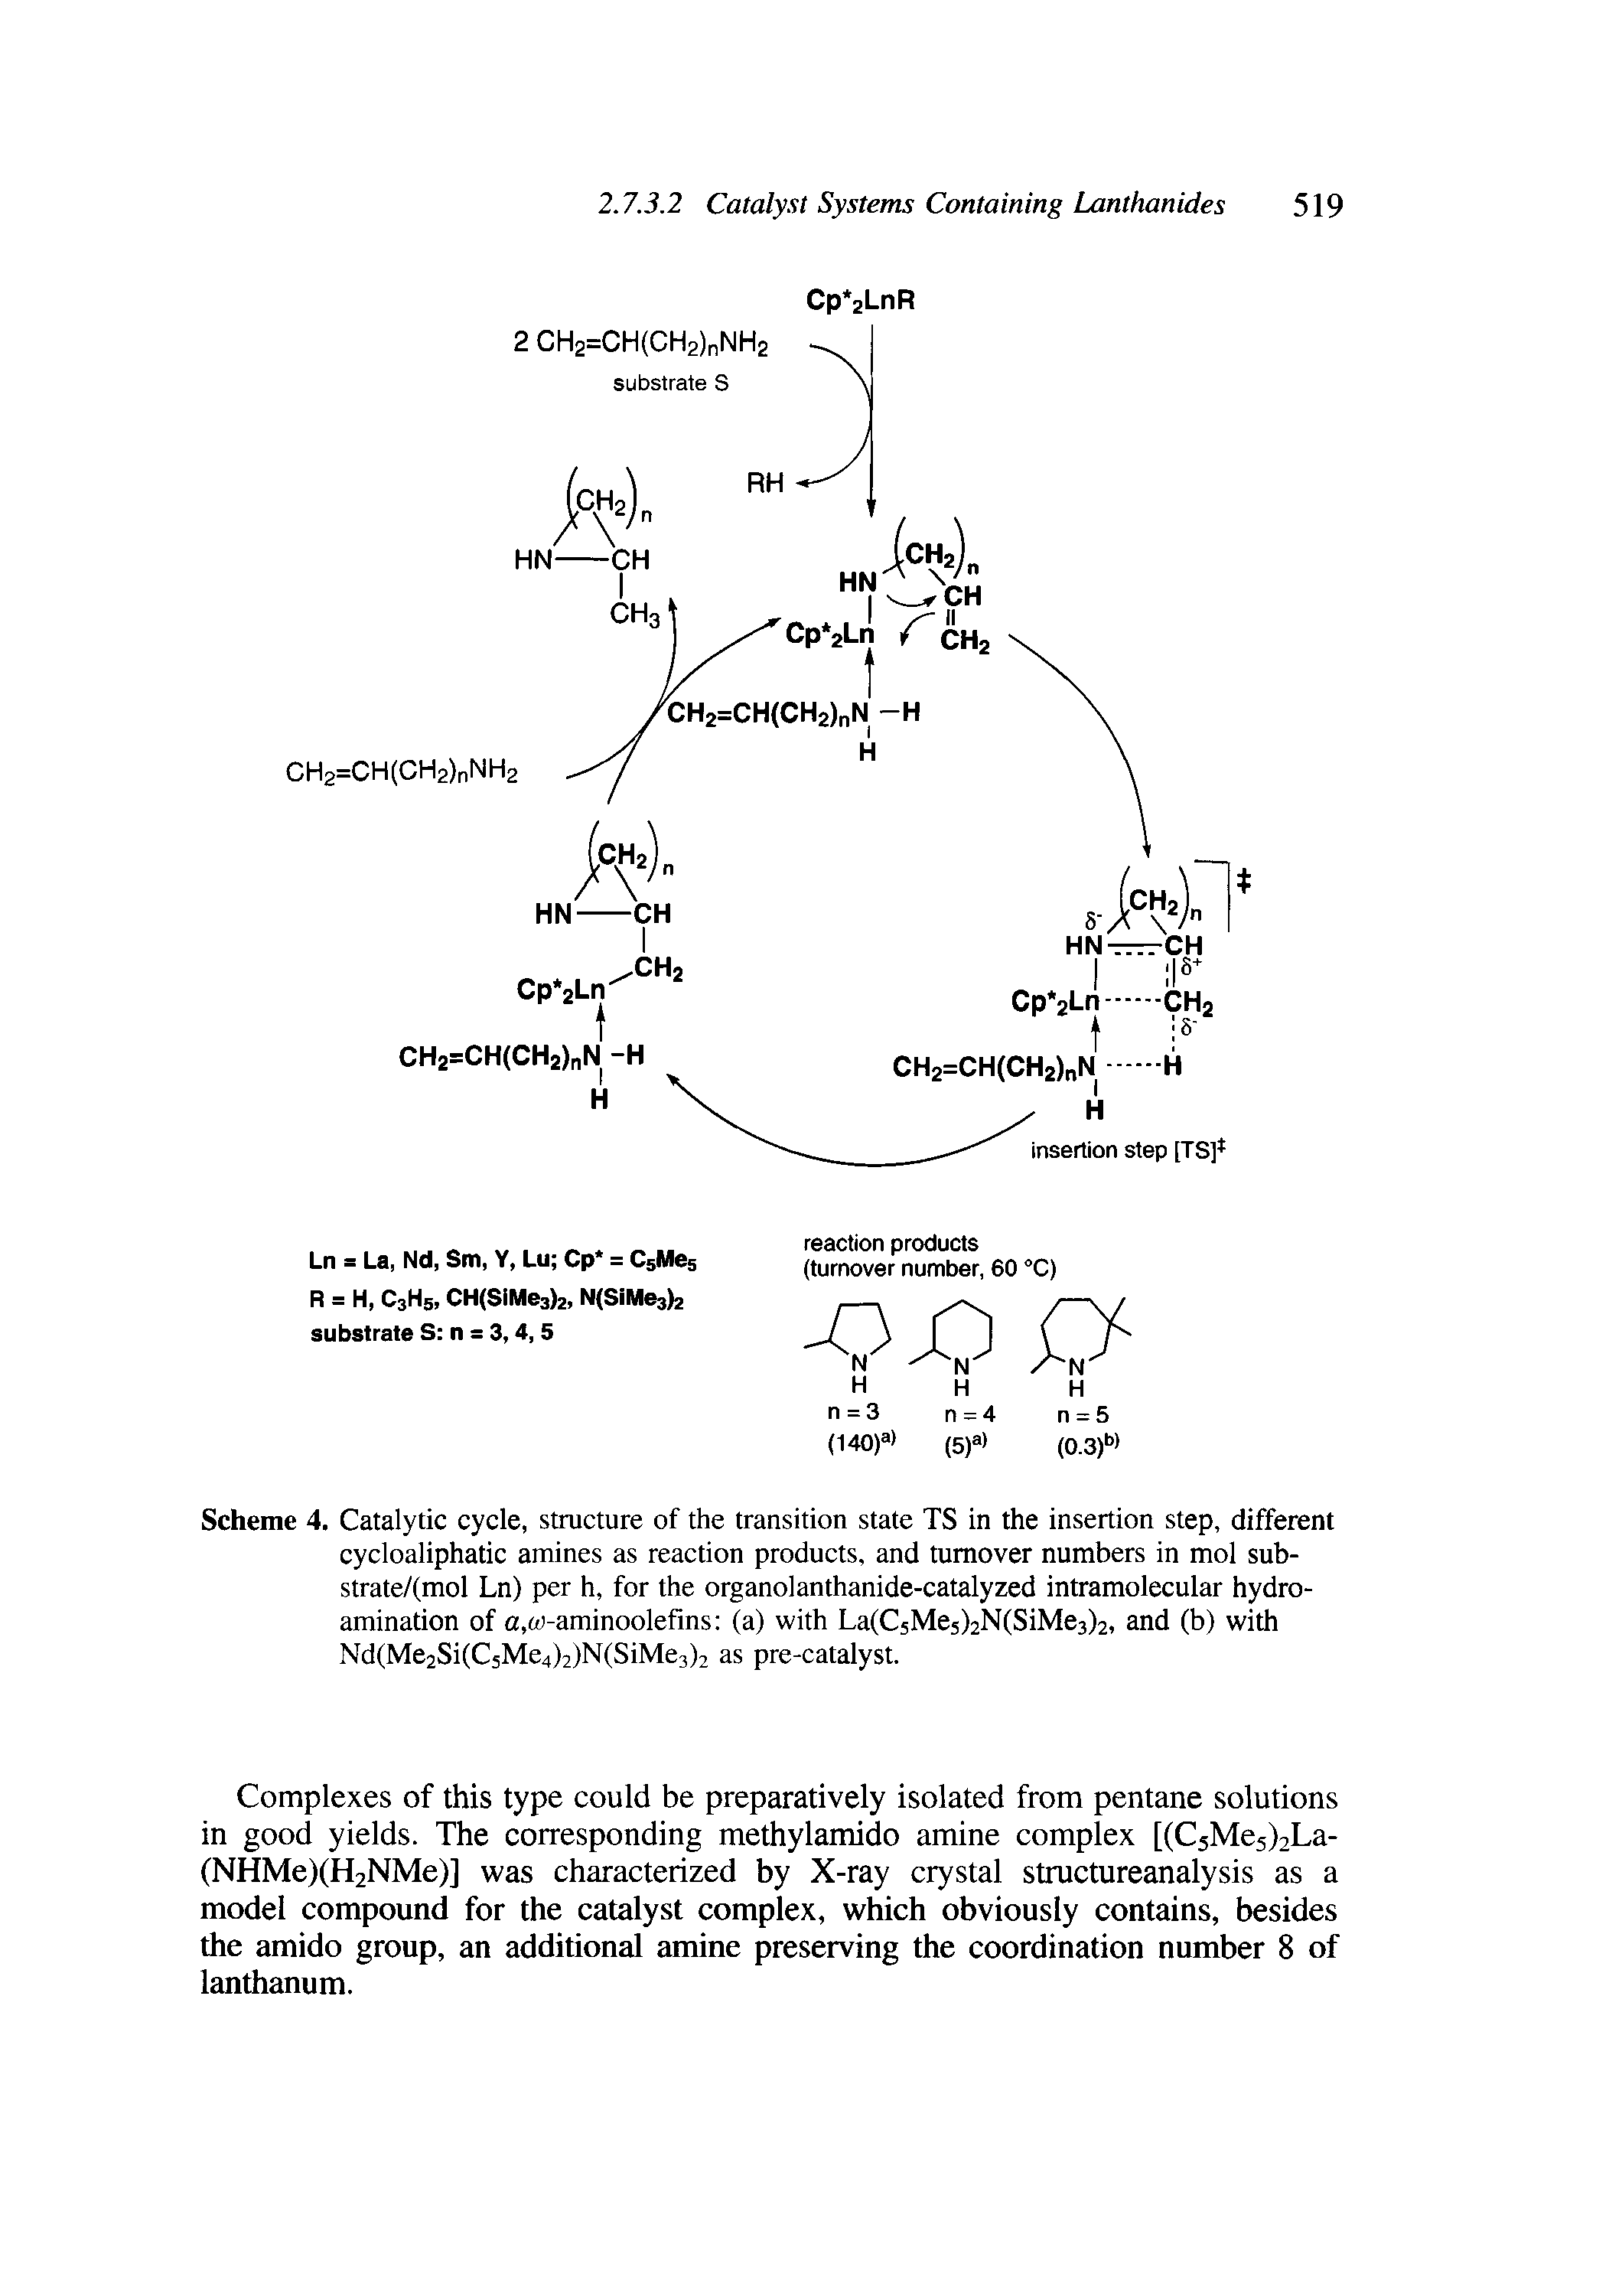 Scheme 4. Catalytic cycle, structure of the transition state TS in the insertion step, different cycloaliphatic amines as reaction products, and turnover numbers in mol sub-strate/(mol Ln) per h, for the organolanthanide-catalyzed intramolecular hydro-amination of a,w-aminoolefins (a) with La(C5Mes)2N(SiMe3)2, and (b) with Nd(Me2Si(C5Me4)2)N(SiMe3)2 as pre-catalyst.